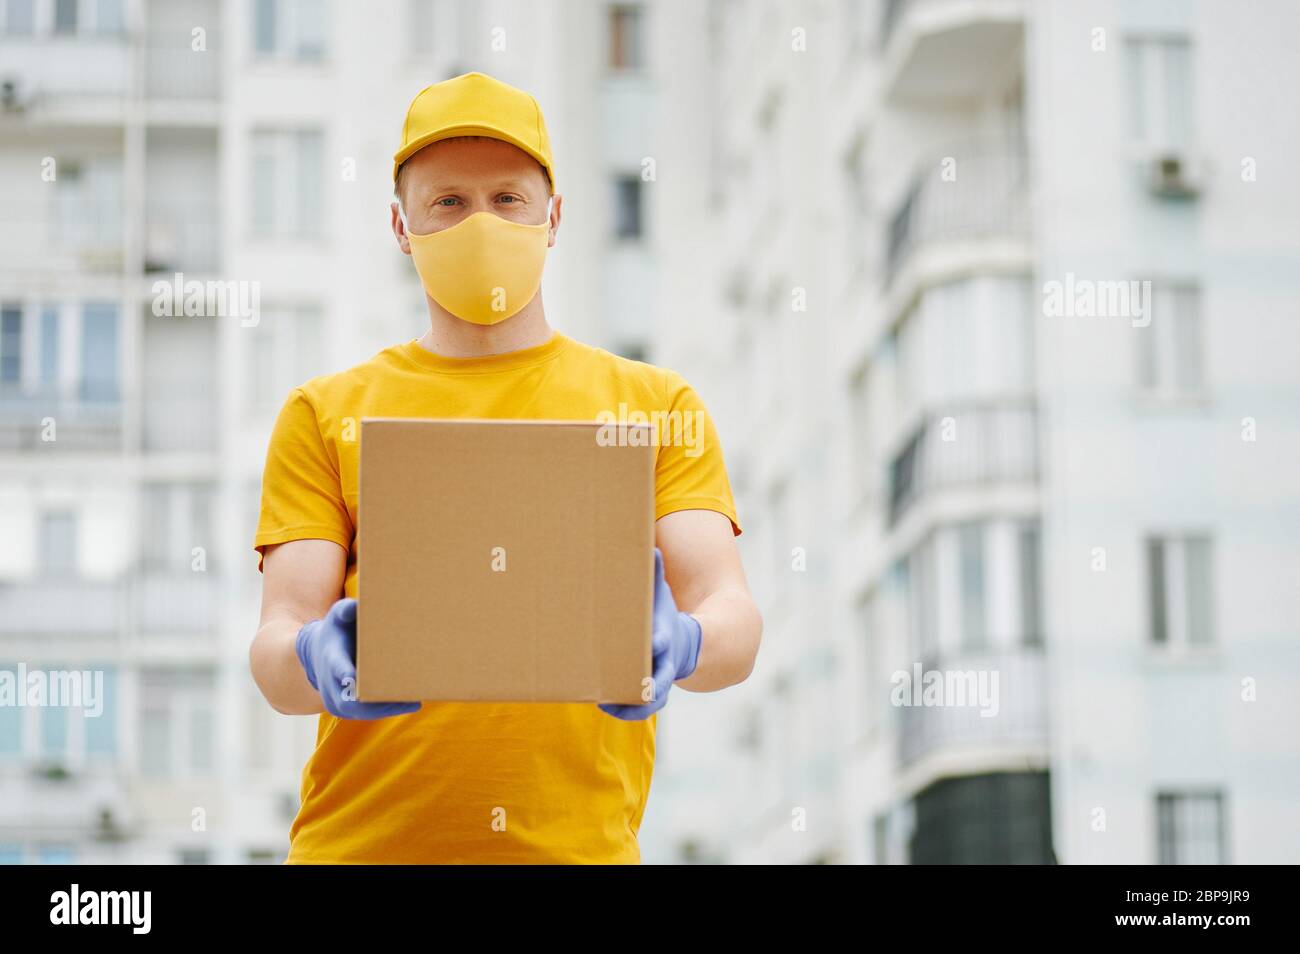 Delivery Man employee in yellow uniform cap, t-shirt, face mask and gloves holds a cardboard box package on building backdrop. Safety delivery quarant Stock Photo